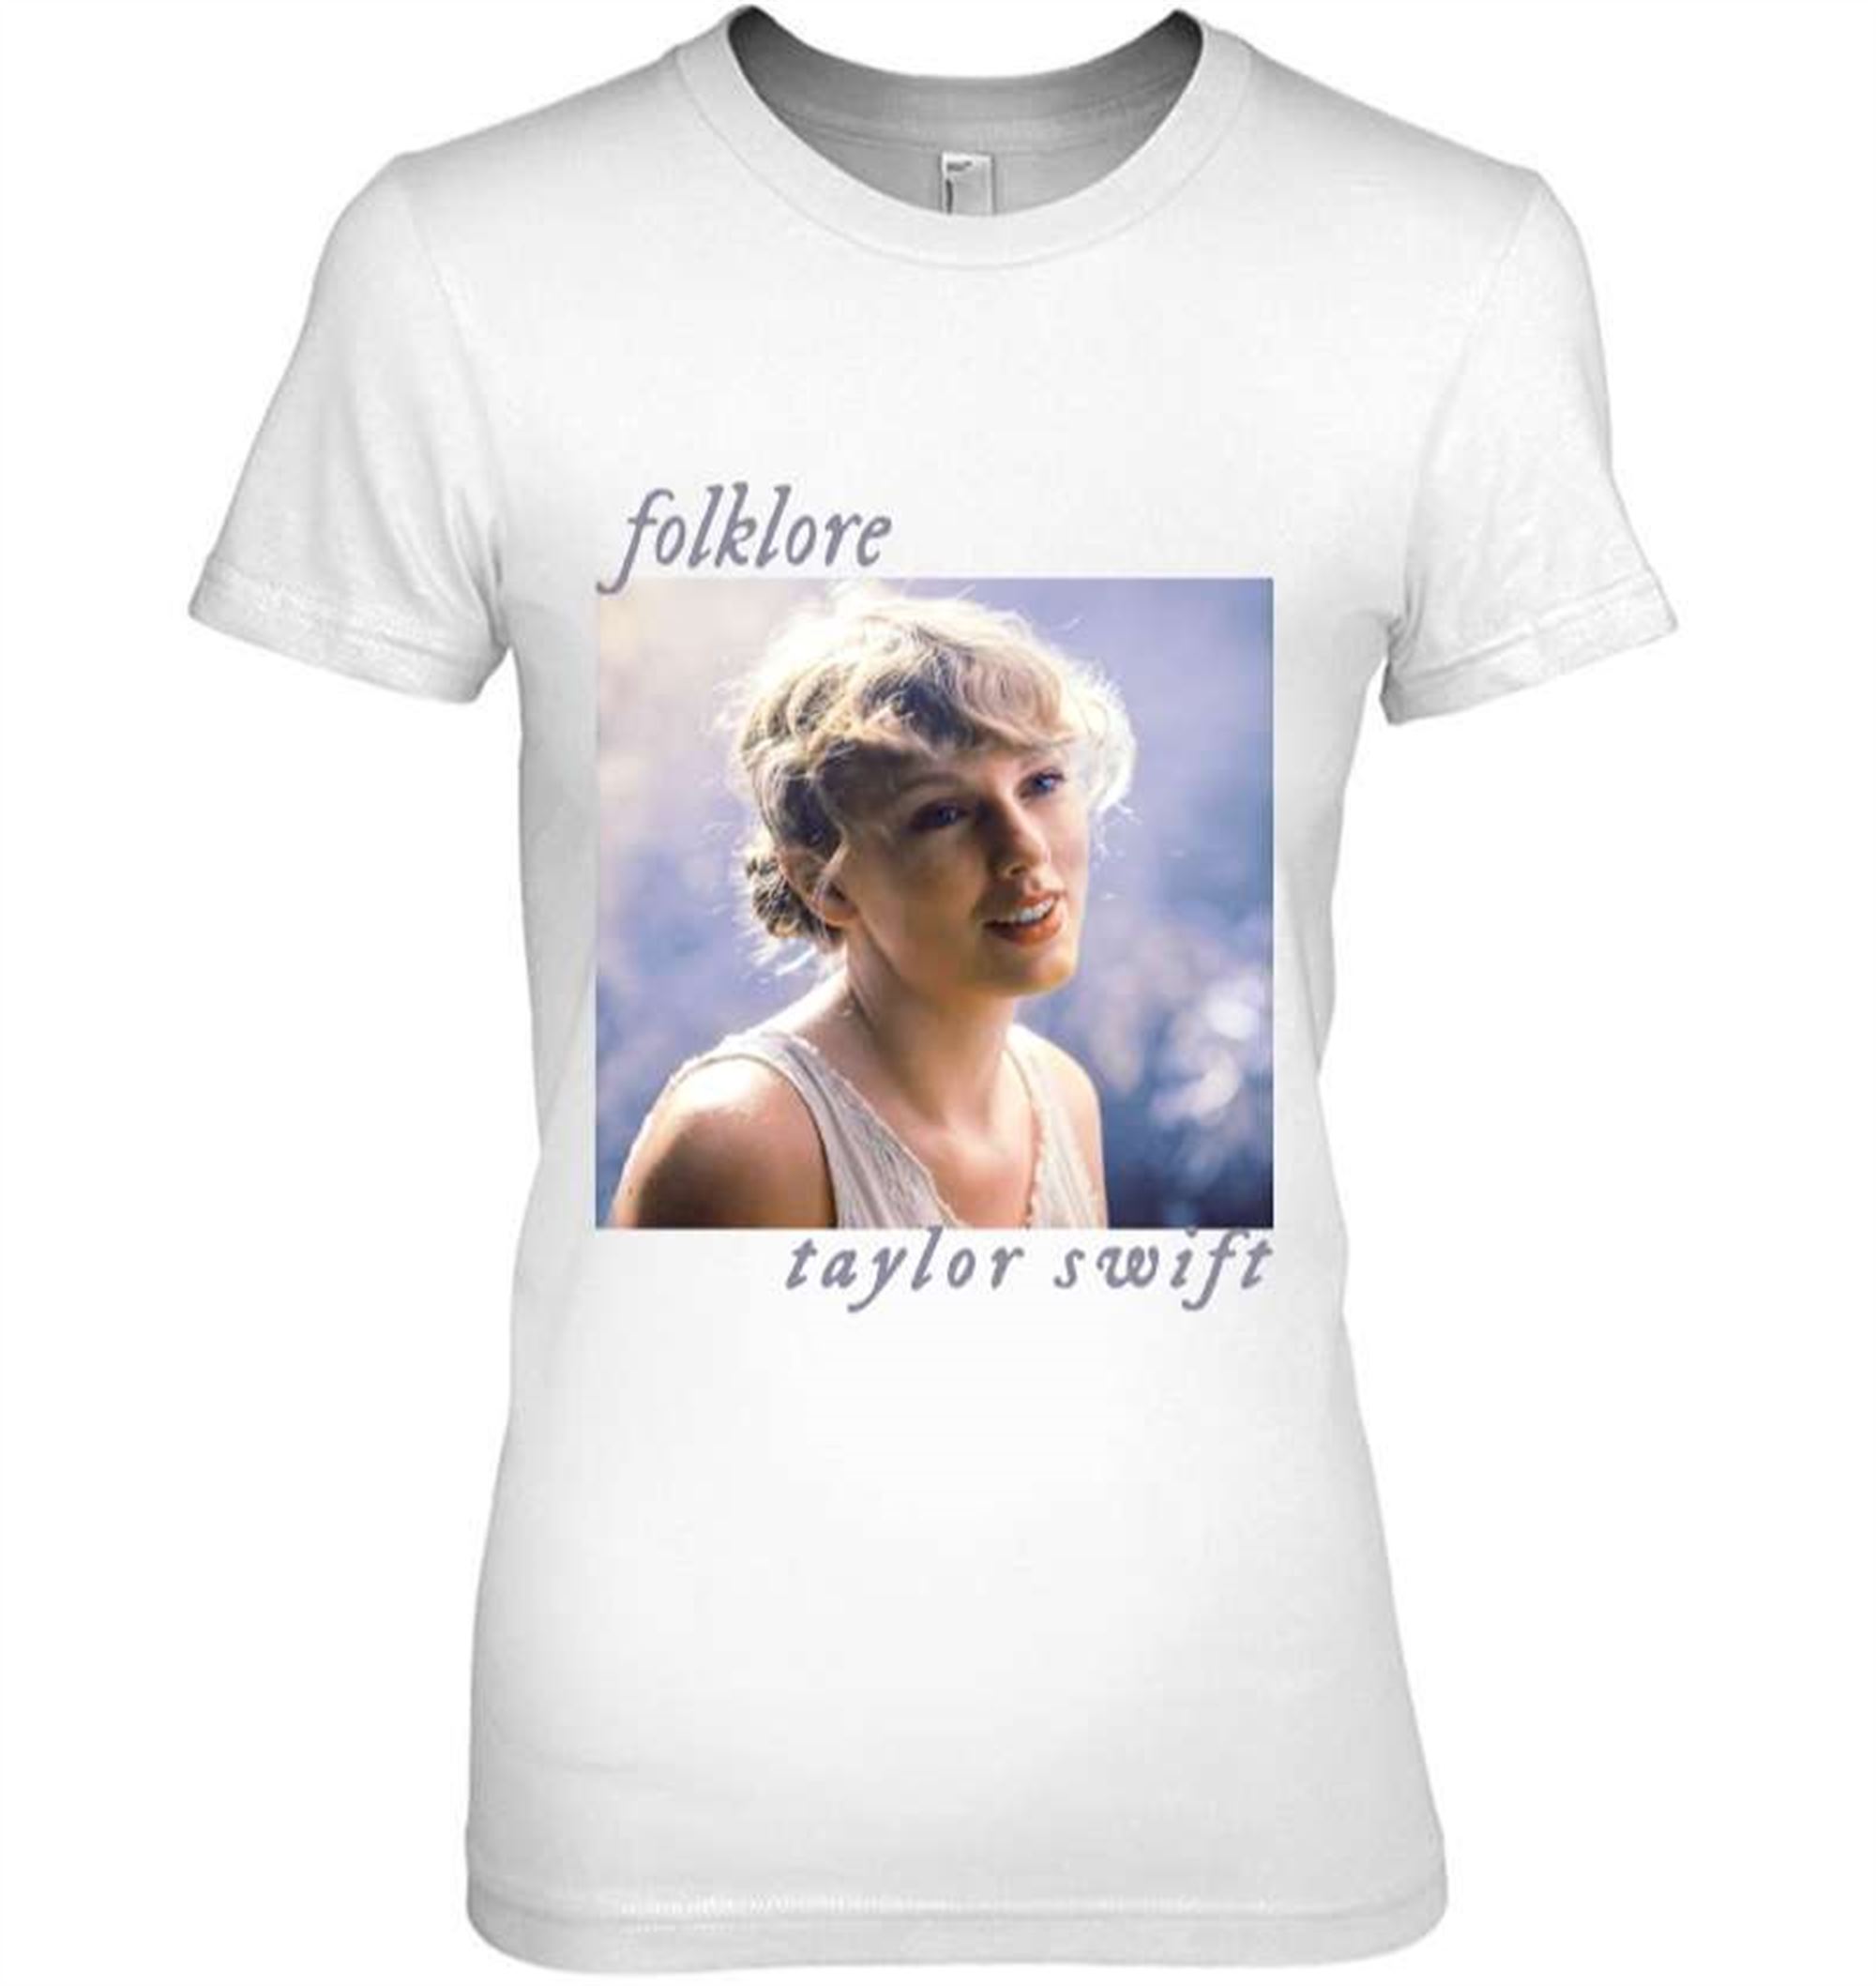 Folklore Taylor Swift T-shirt Plus Size Up To 5xl